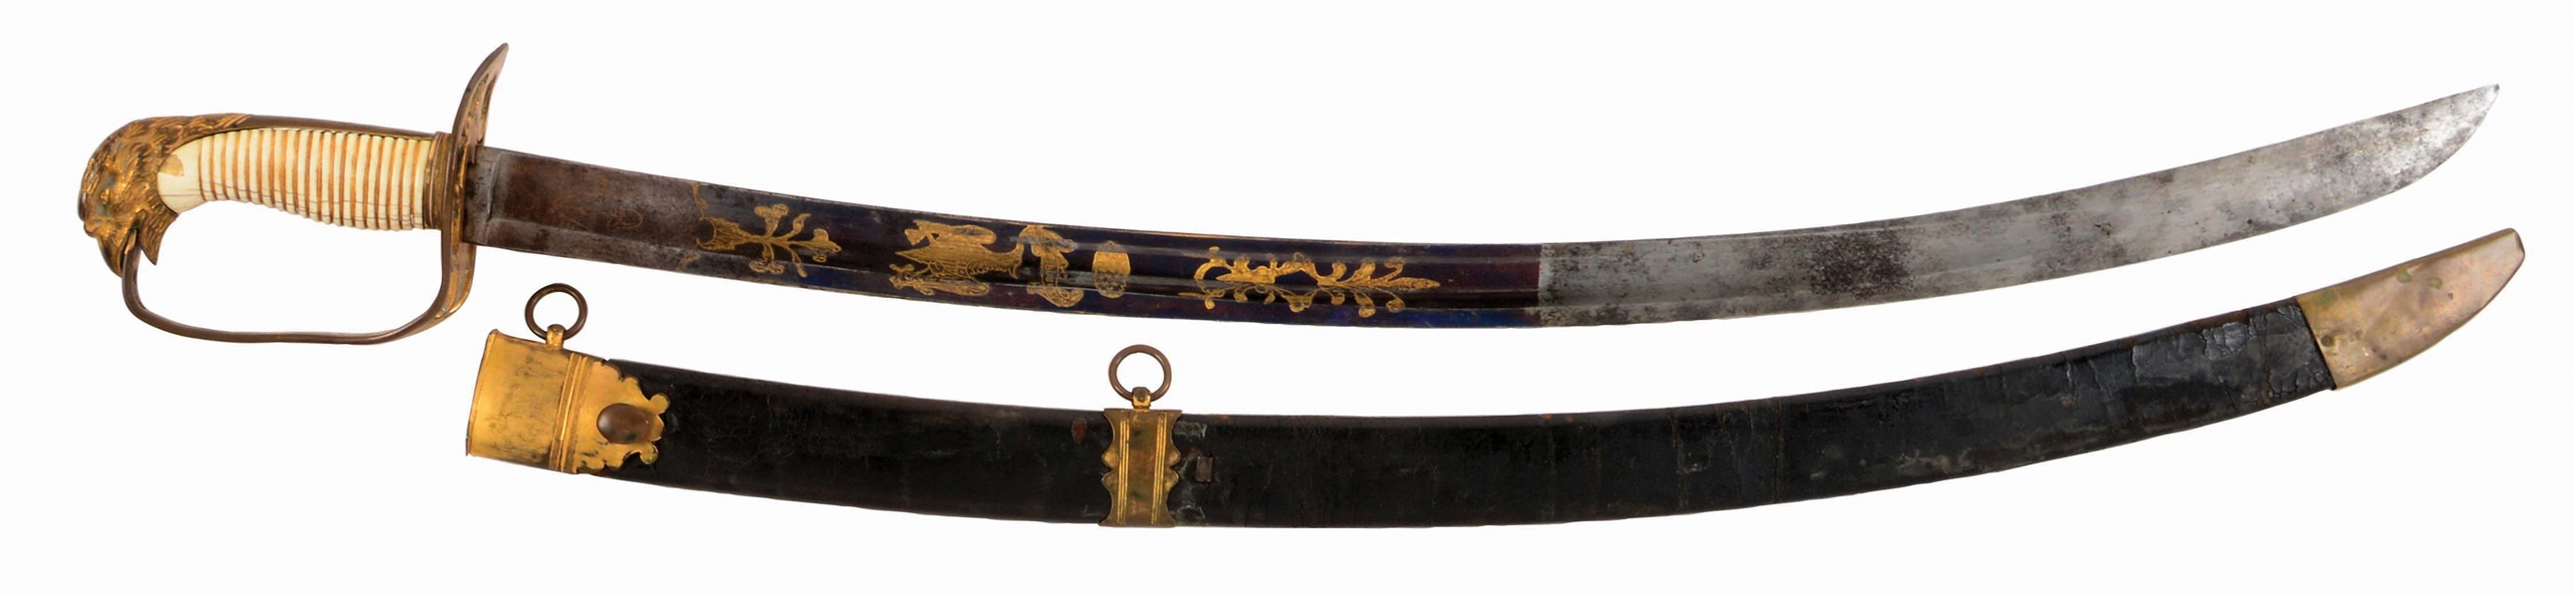 ELABORATE AND EARLY EAGLE HEAD POMMEL SABER WITH SCABBARD.